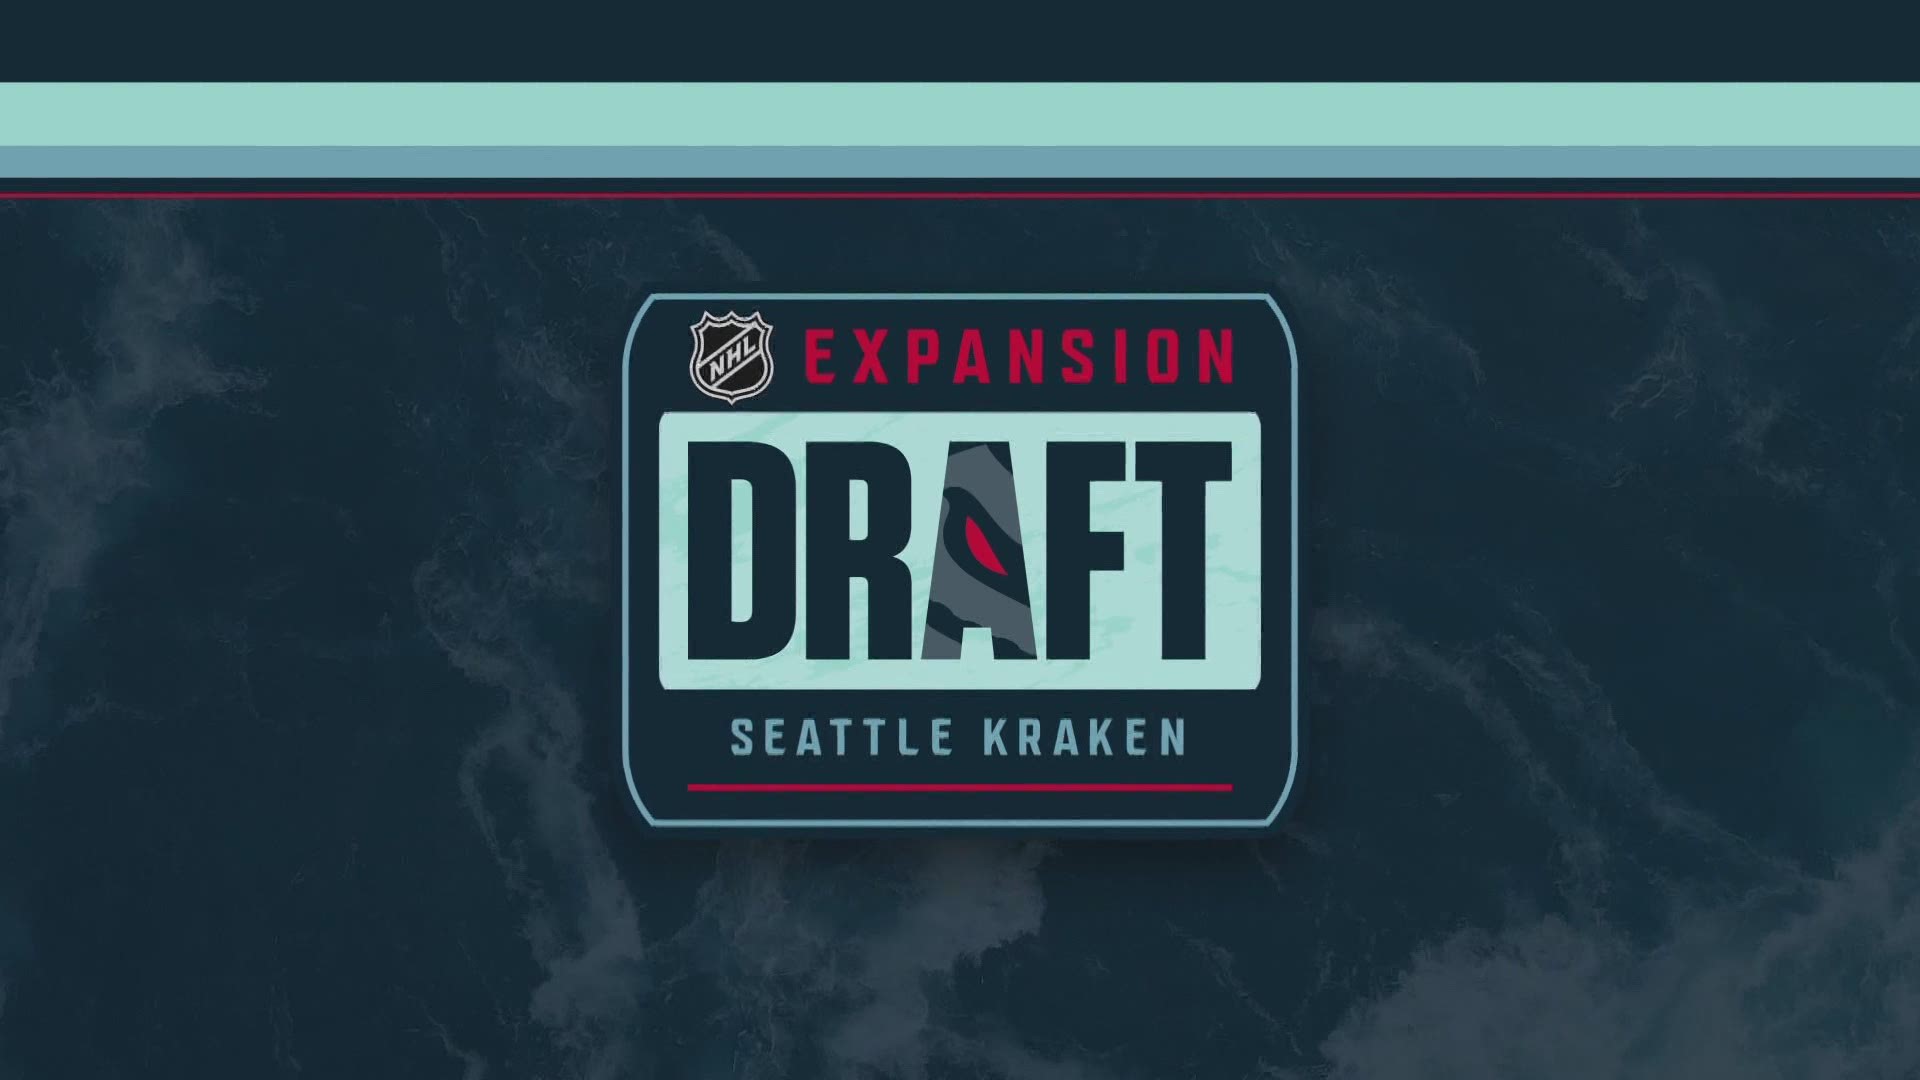 On Wednesday, the Seattle Kraken will select the National Hockey League players that will make up the team’s inaugural roster.